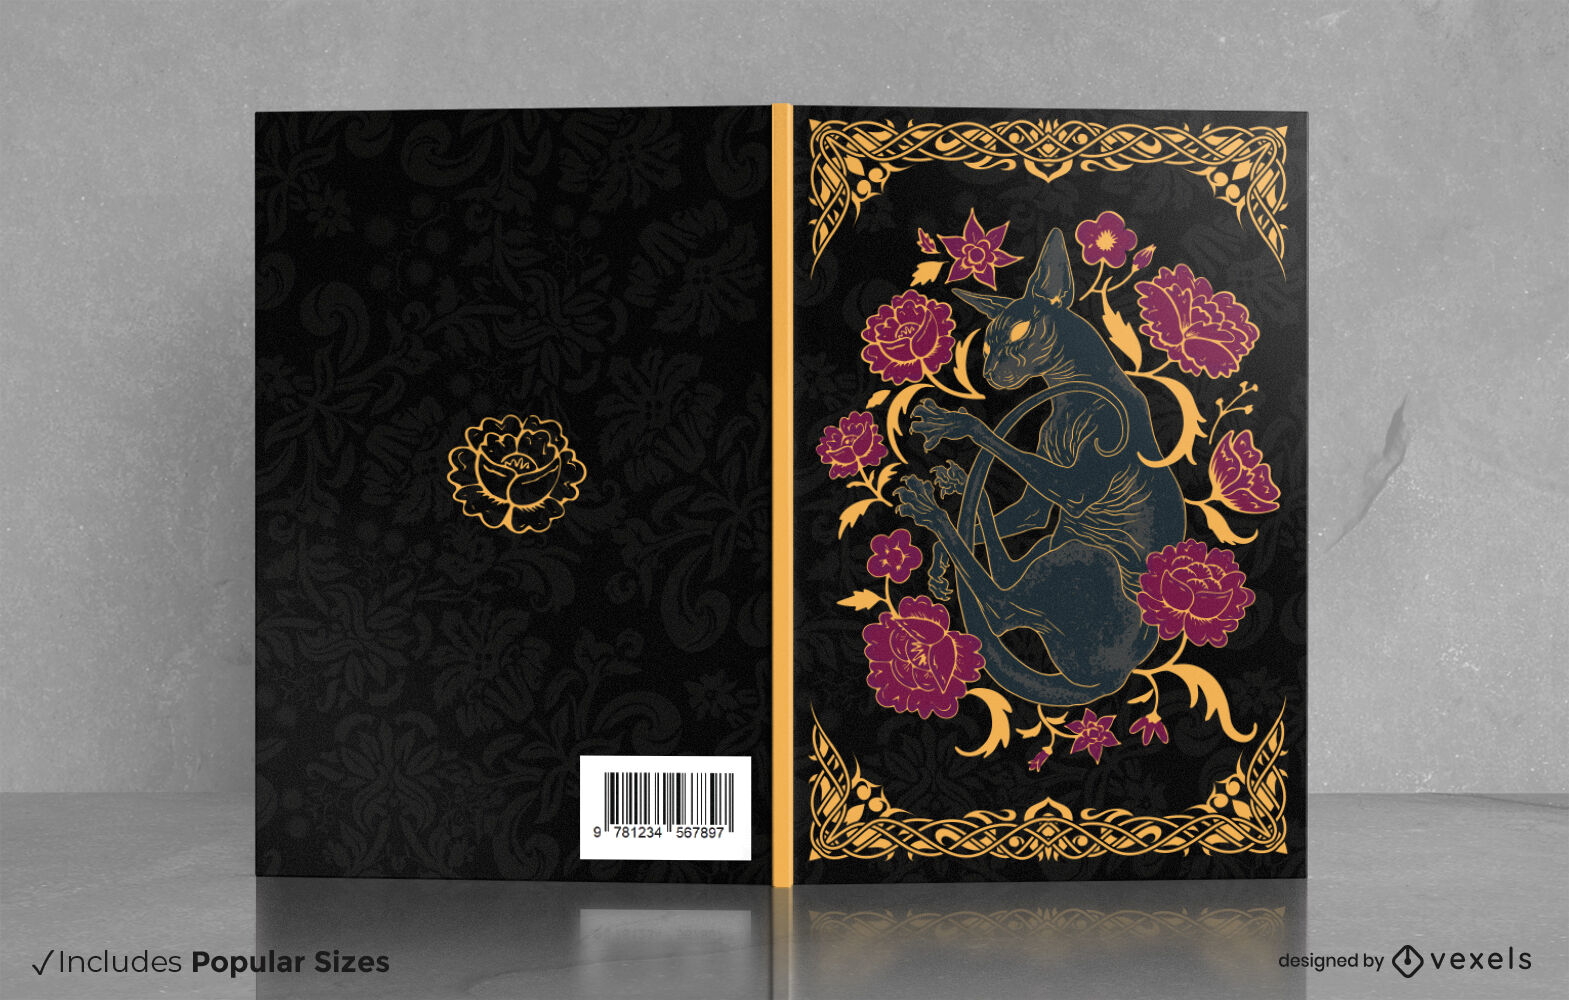 Black cat with flowers book cover design